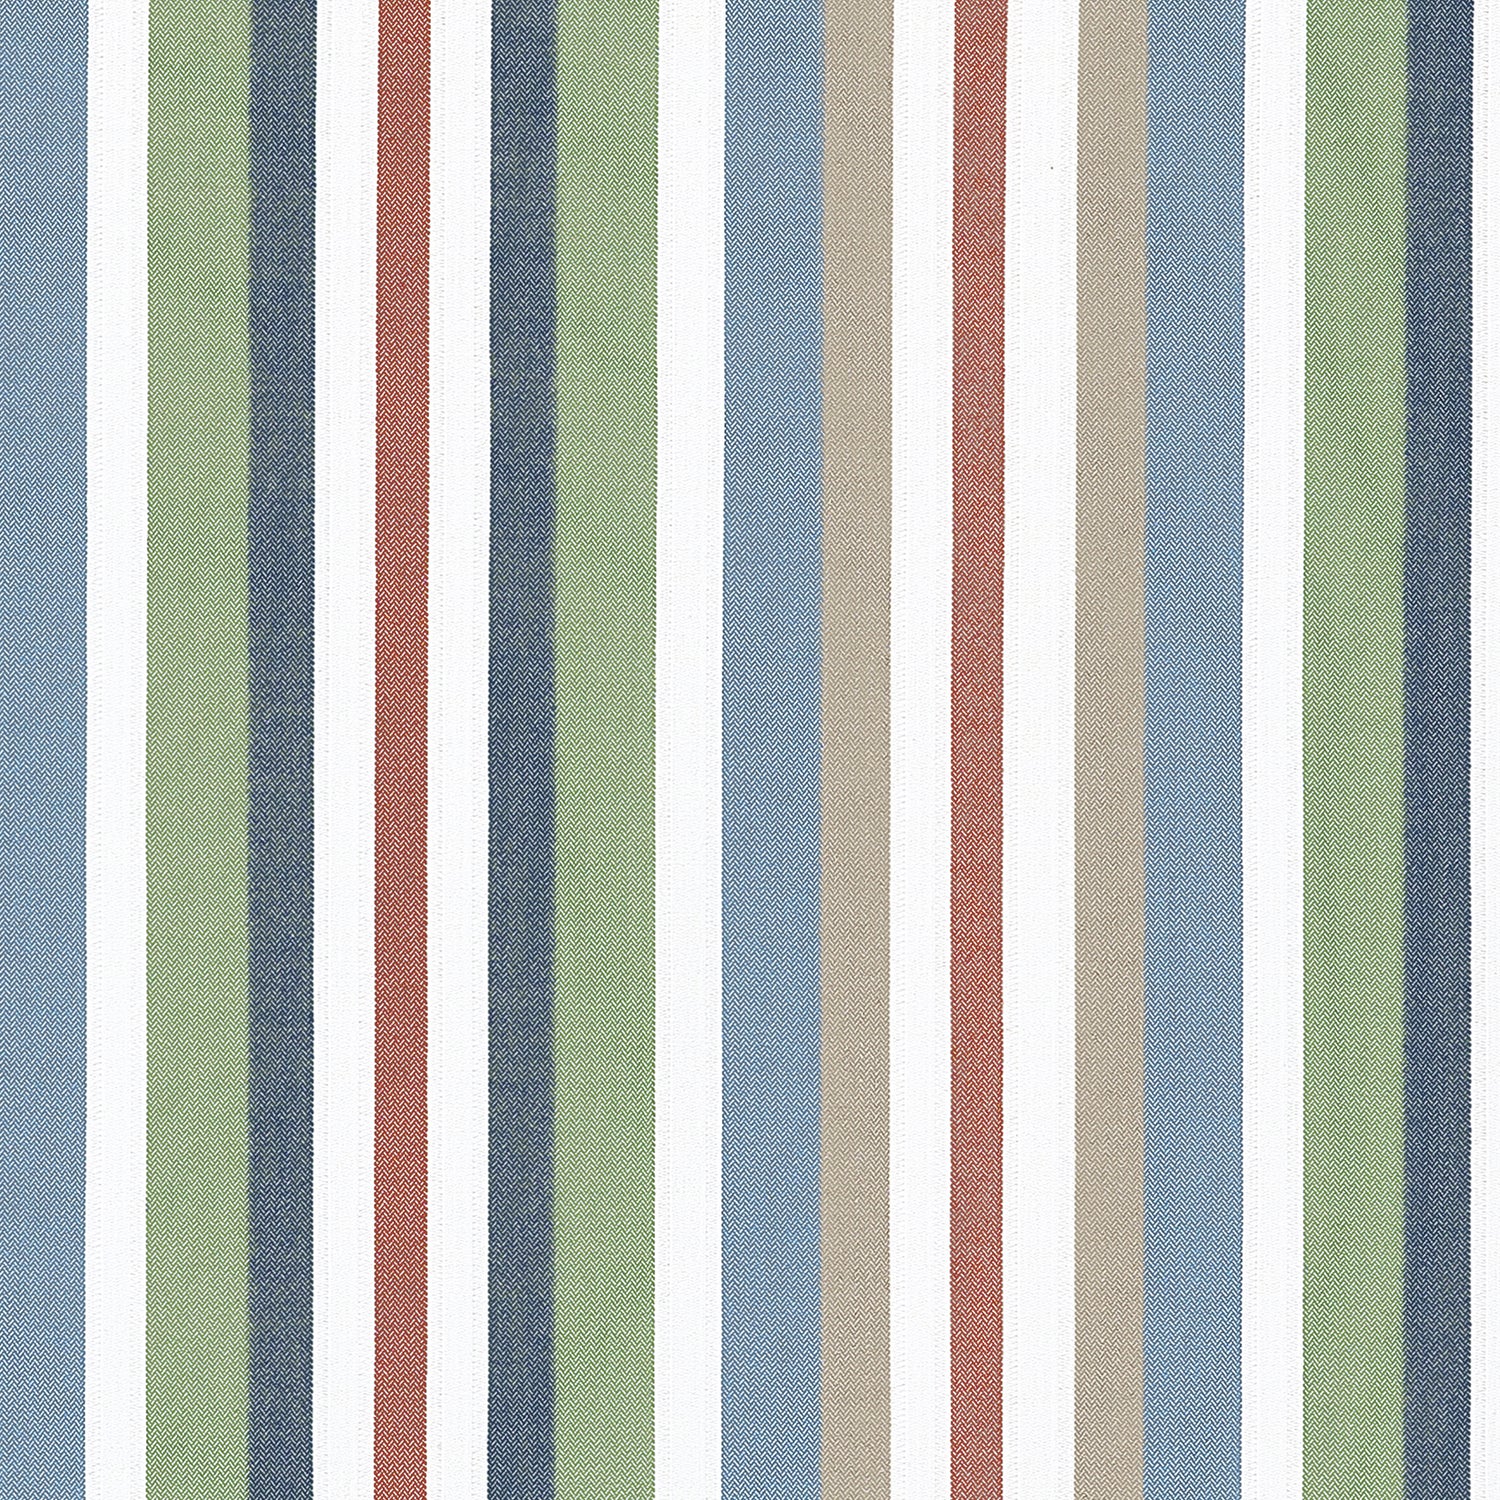 Kalea Stripe fabric in harbor color - pattern number W81670 - by Thibaut in the Locale collection